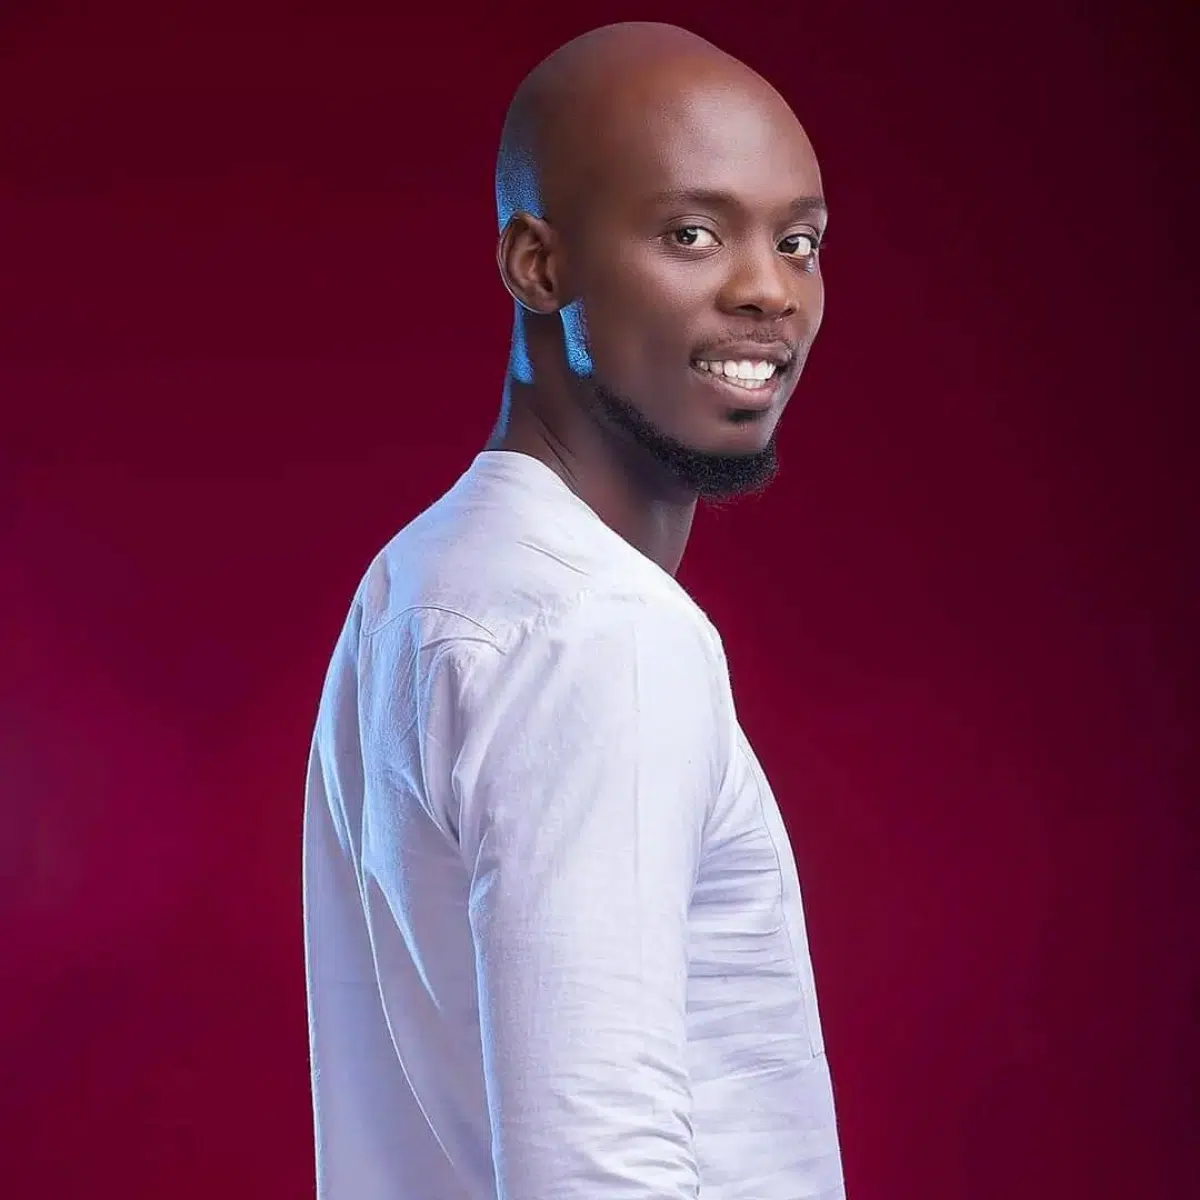 DOWNLOAD: Pompi – “Maintain” Mp3